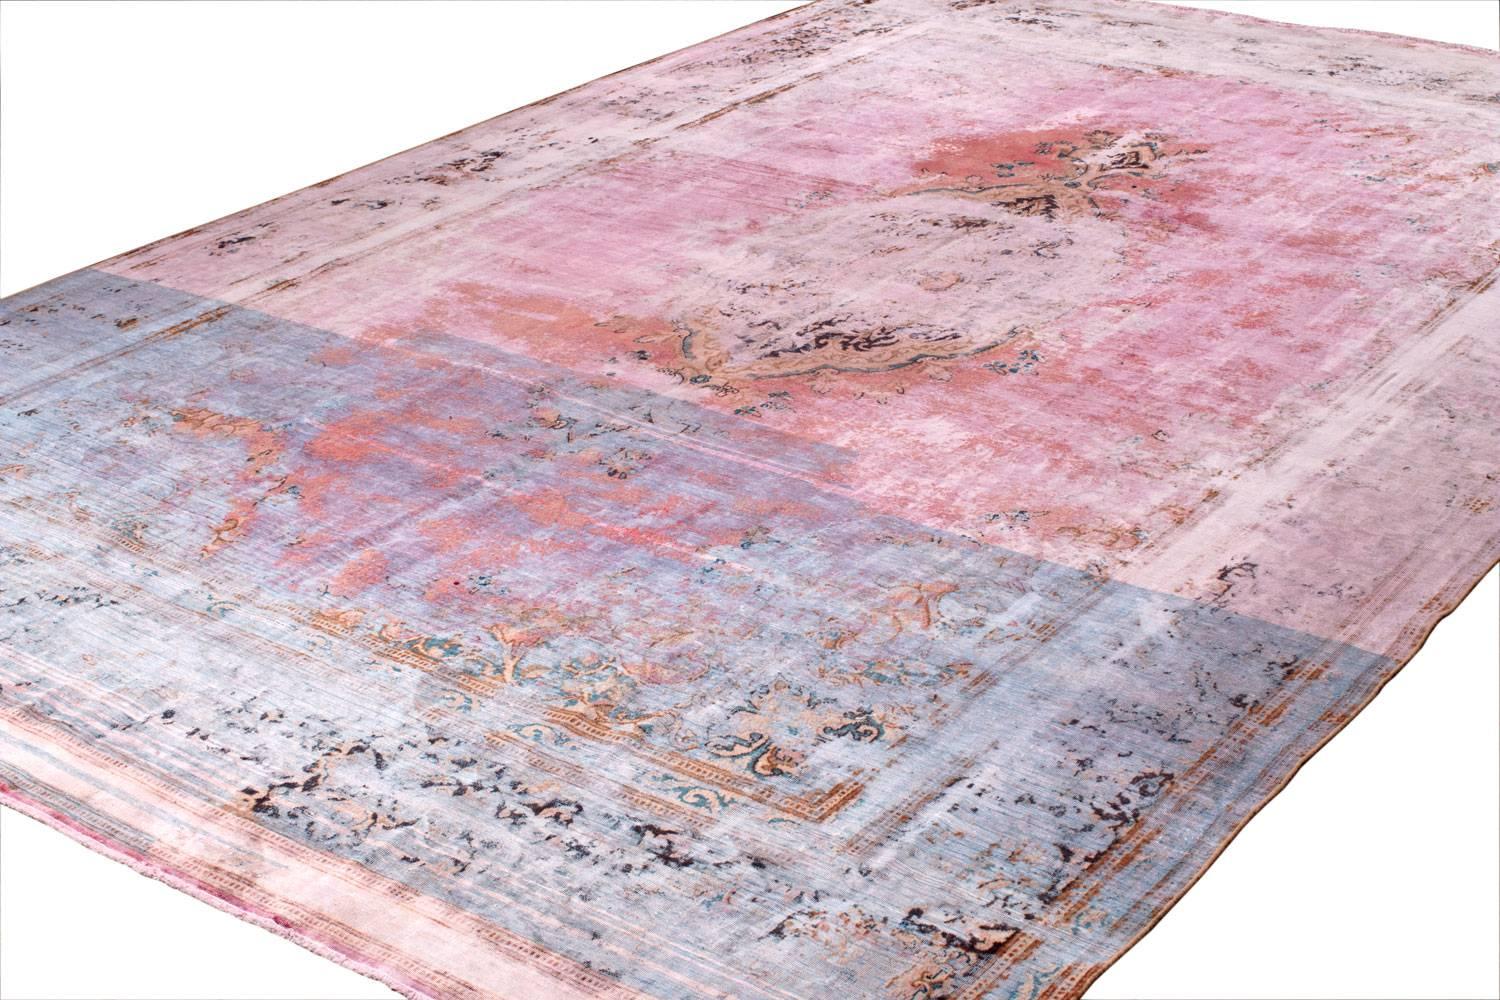 This beautiful carpet is handwoven and artfully sheared down to create a dreamy pastel pink art rug. Measures: 9' x 14'. Handmade in Afghanistan out of hand spun Afghan wool. It was designed to look distressed and worn but it is brand new. 

 Joseph